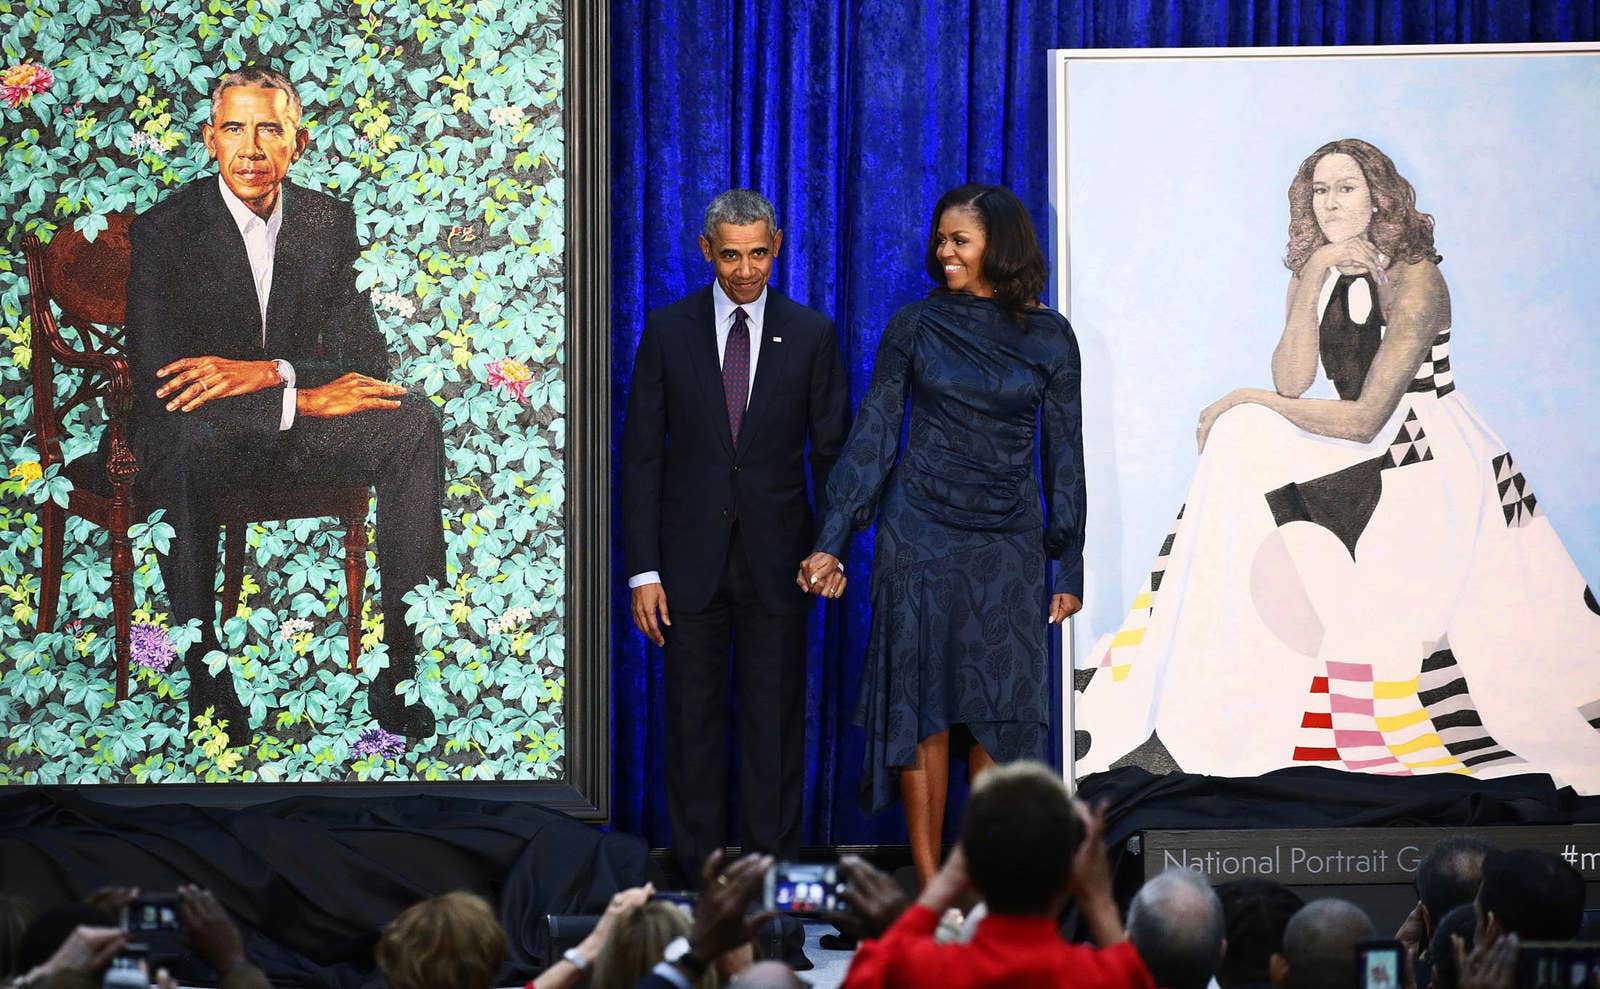 Former US president Barack Obama and former first lady Michelle Obama hold hands between their portraits during an unveiling ceremony at the Smithsonian's National Portrait Gallery in Washington, DC, on Feb. 12.